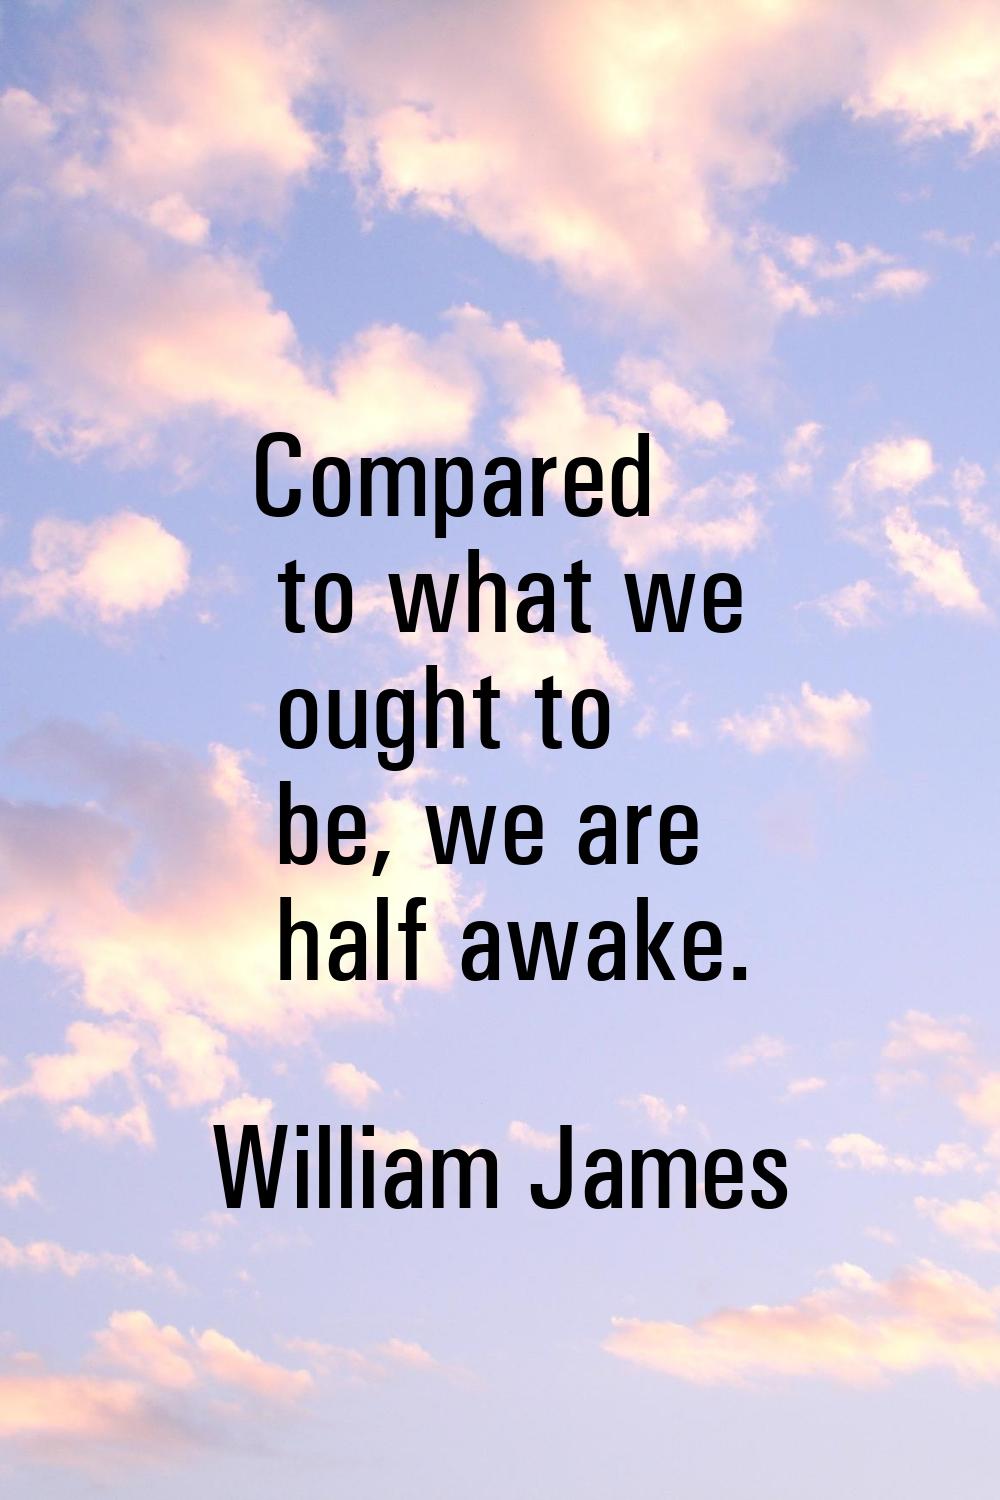 Compared to what we ought to be, we are half awake.